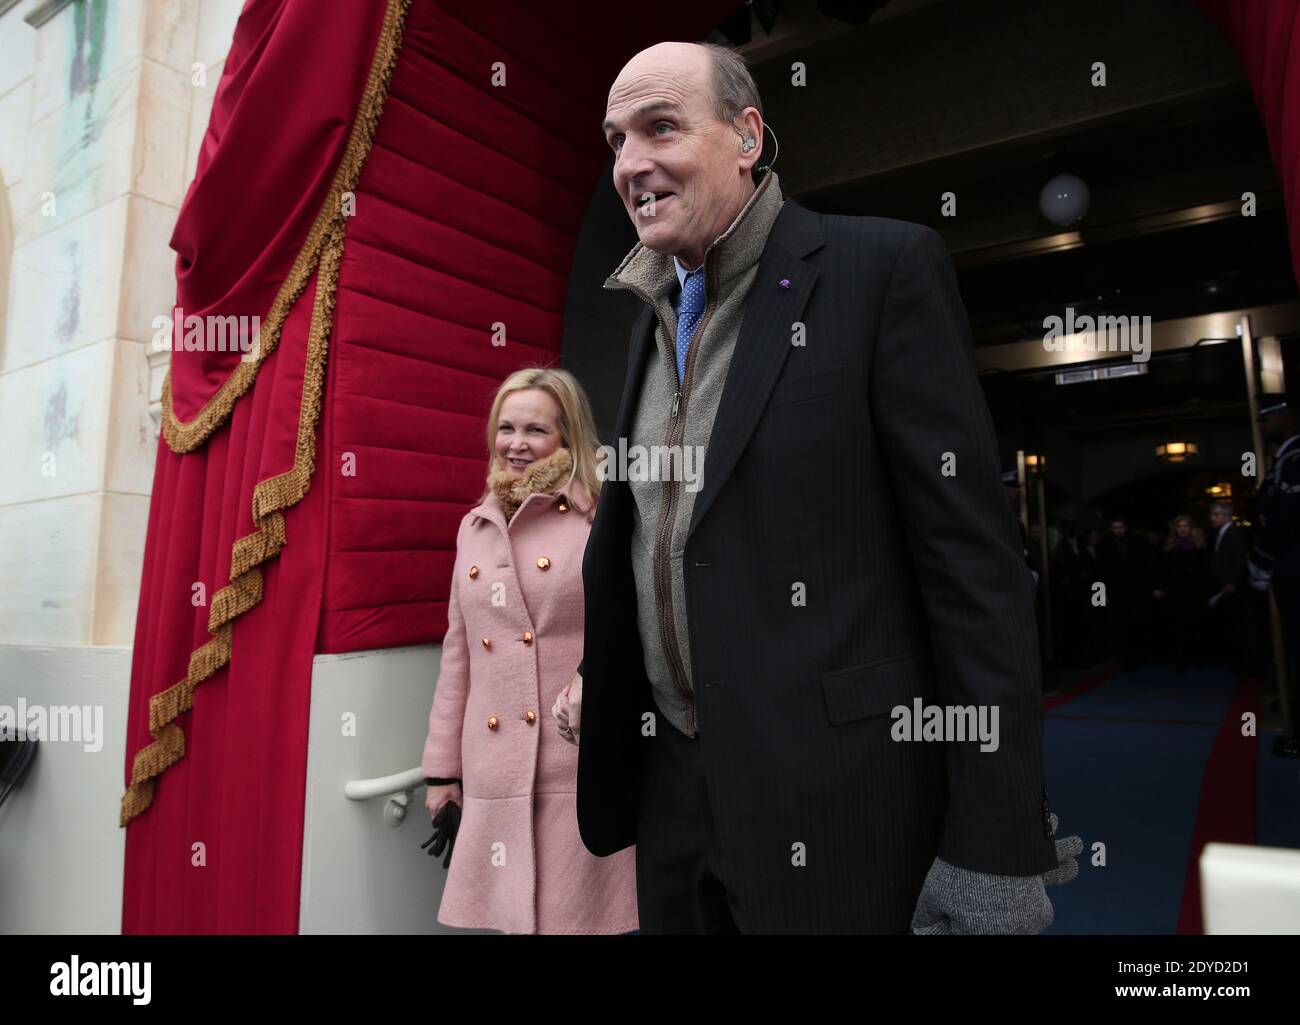 Singer James Taylor and wife Kim Taylor arrive during the presidential inauguration on the West Front of the U.S. Capitol in Washington, DC, USA, on January 21, 2013. Barack Obama was re-elected for a second term as President of the United States. Photo by Win McNamee/Pool/ABACAPRESS.COM Stock Photo